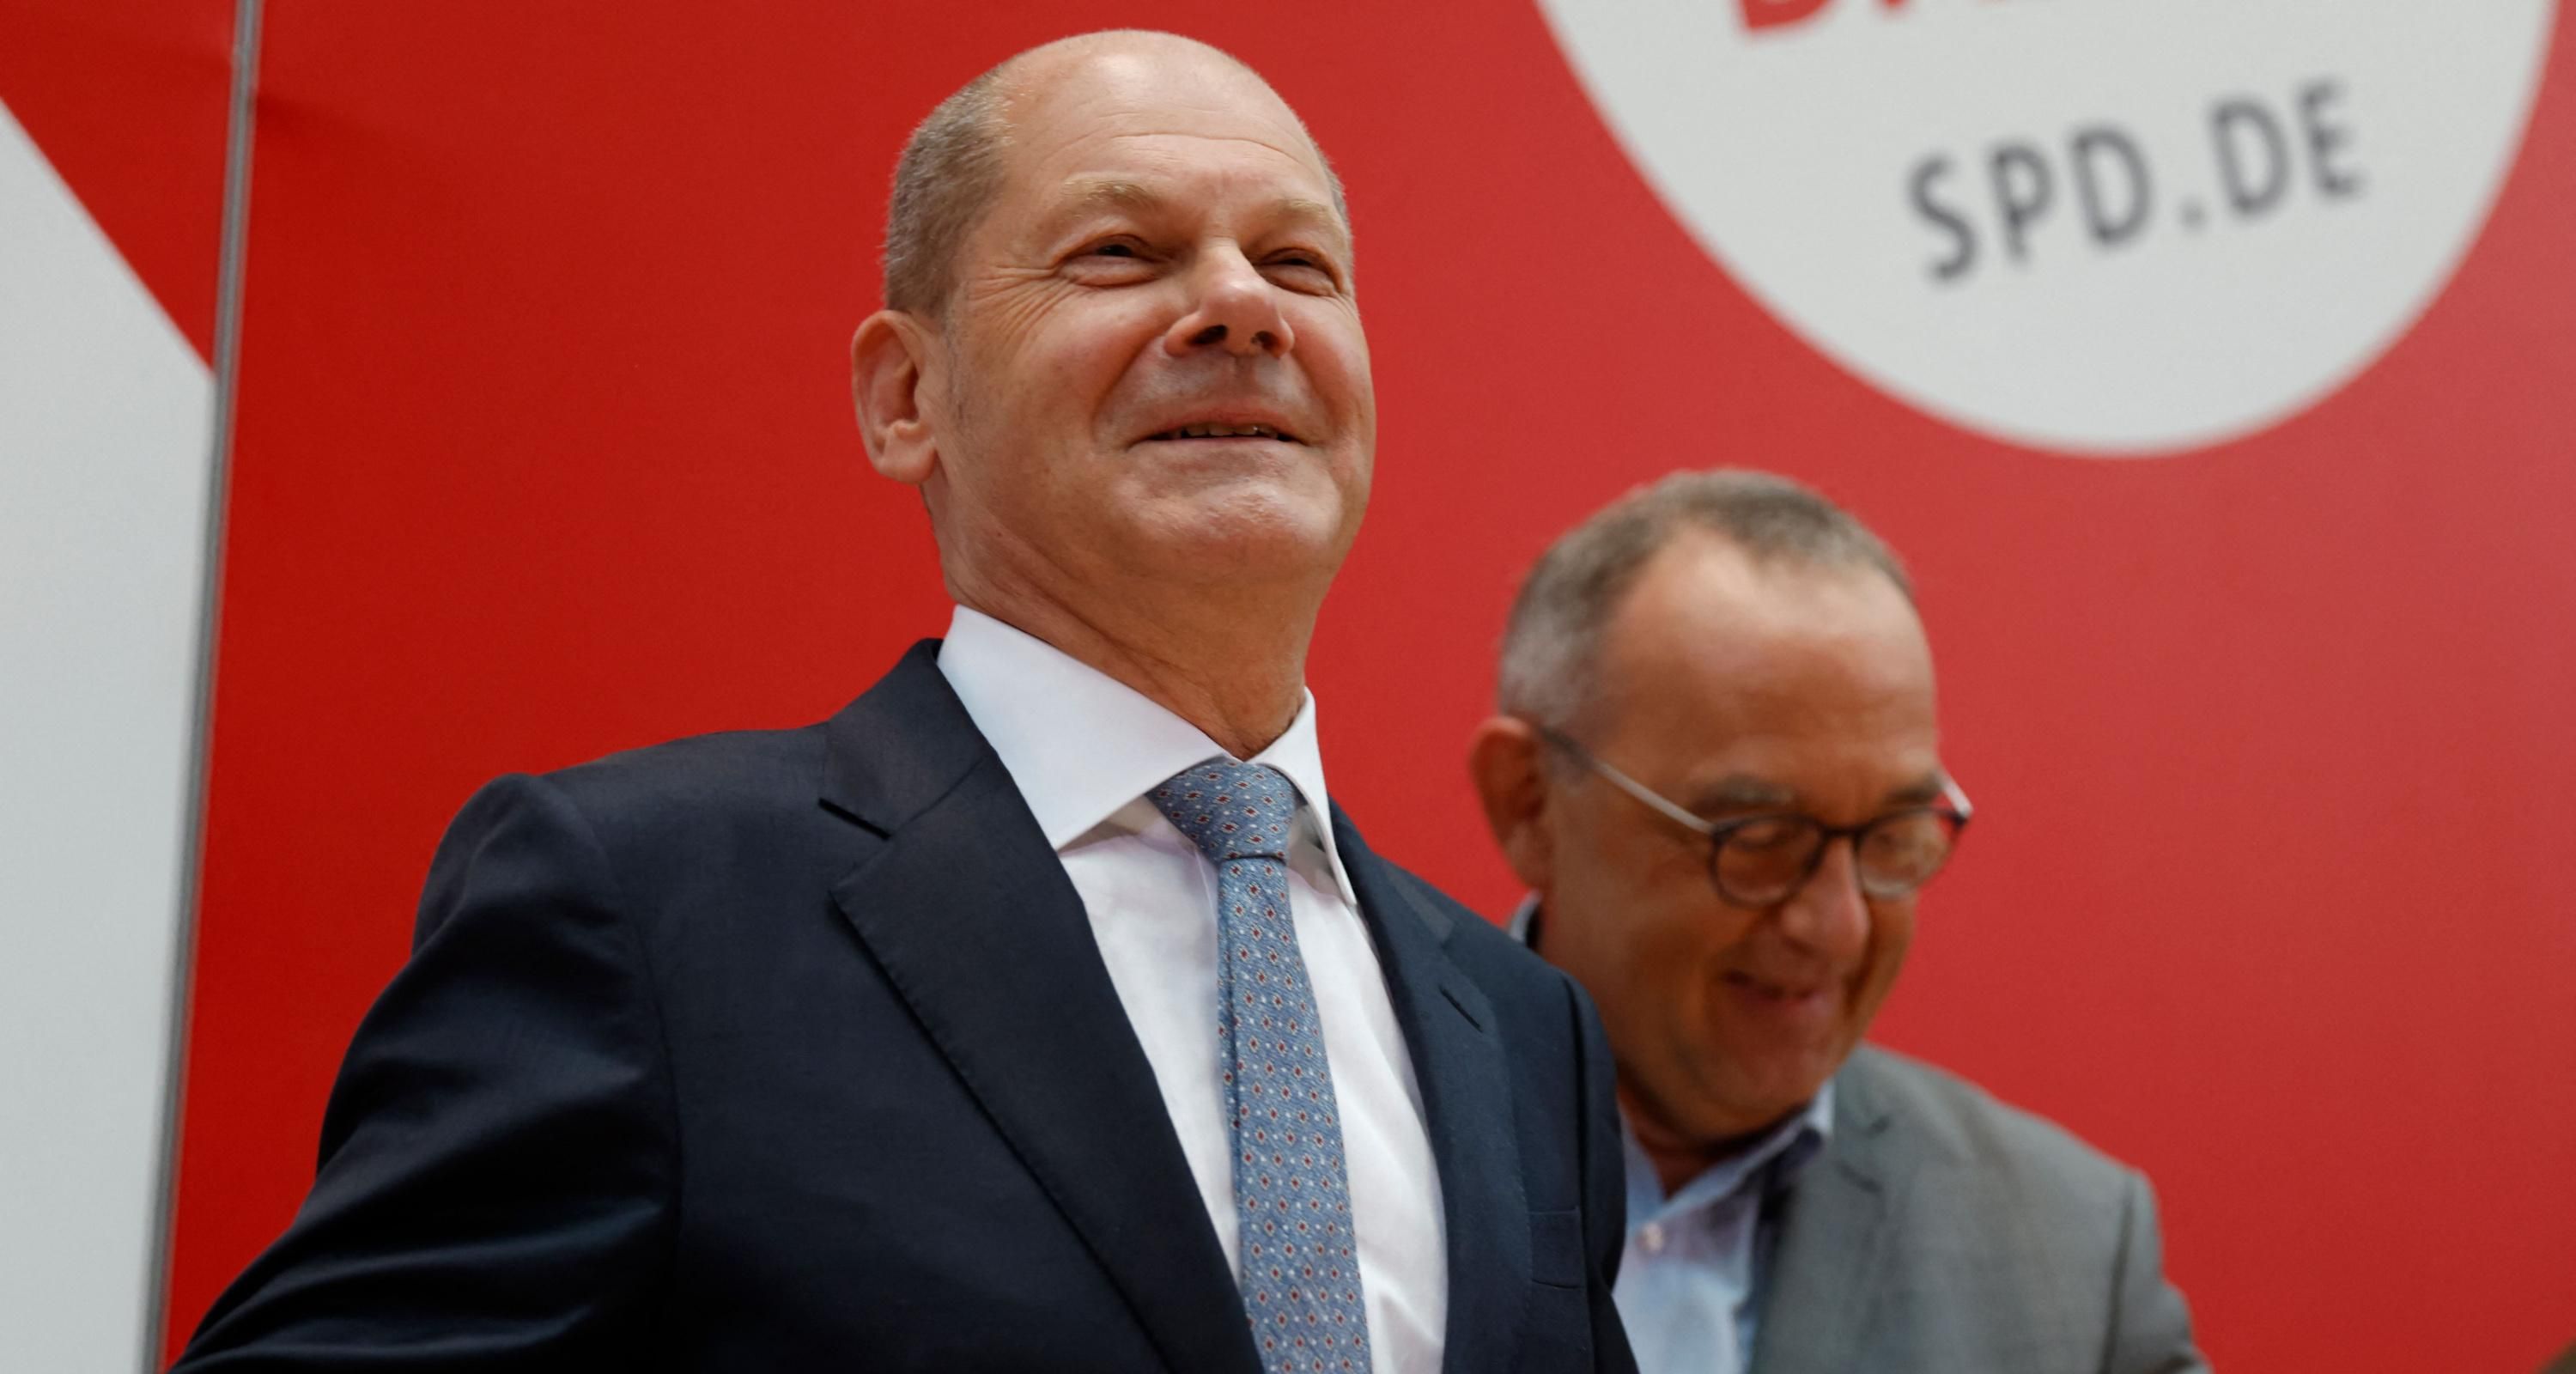 German Finance Minister, Vice-Chancellor and the Social Democratic SPD Party's candidate for chancellor Olaf Scholz 